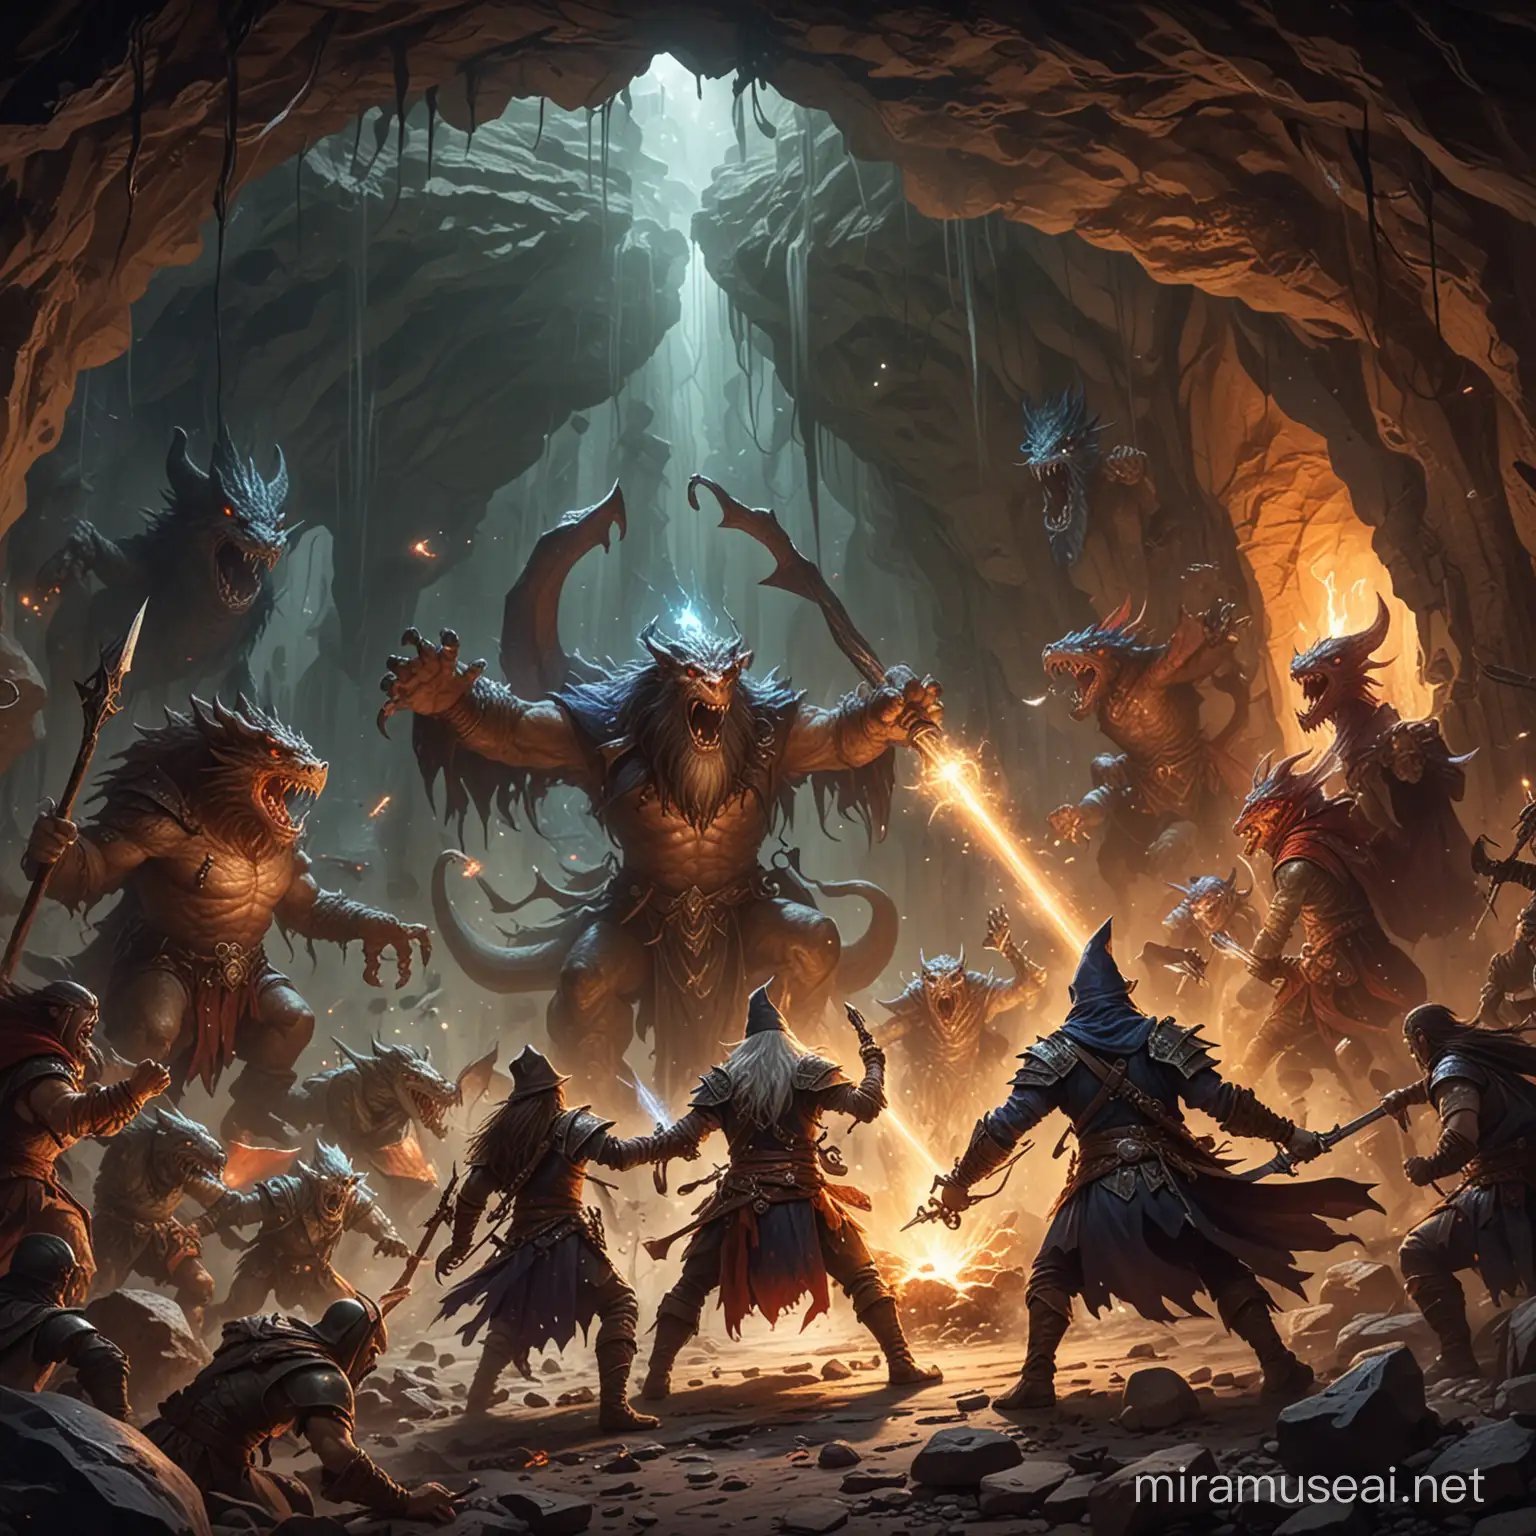 Wizard fighting monsters in a cave D&D

